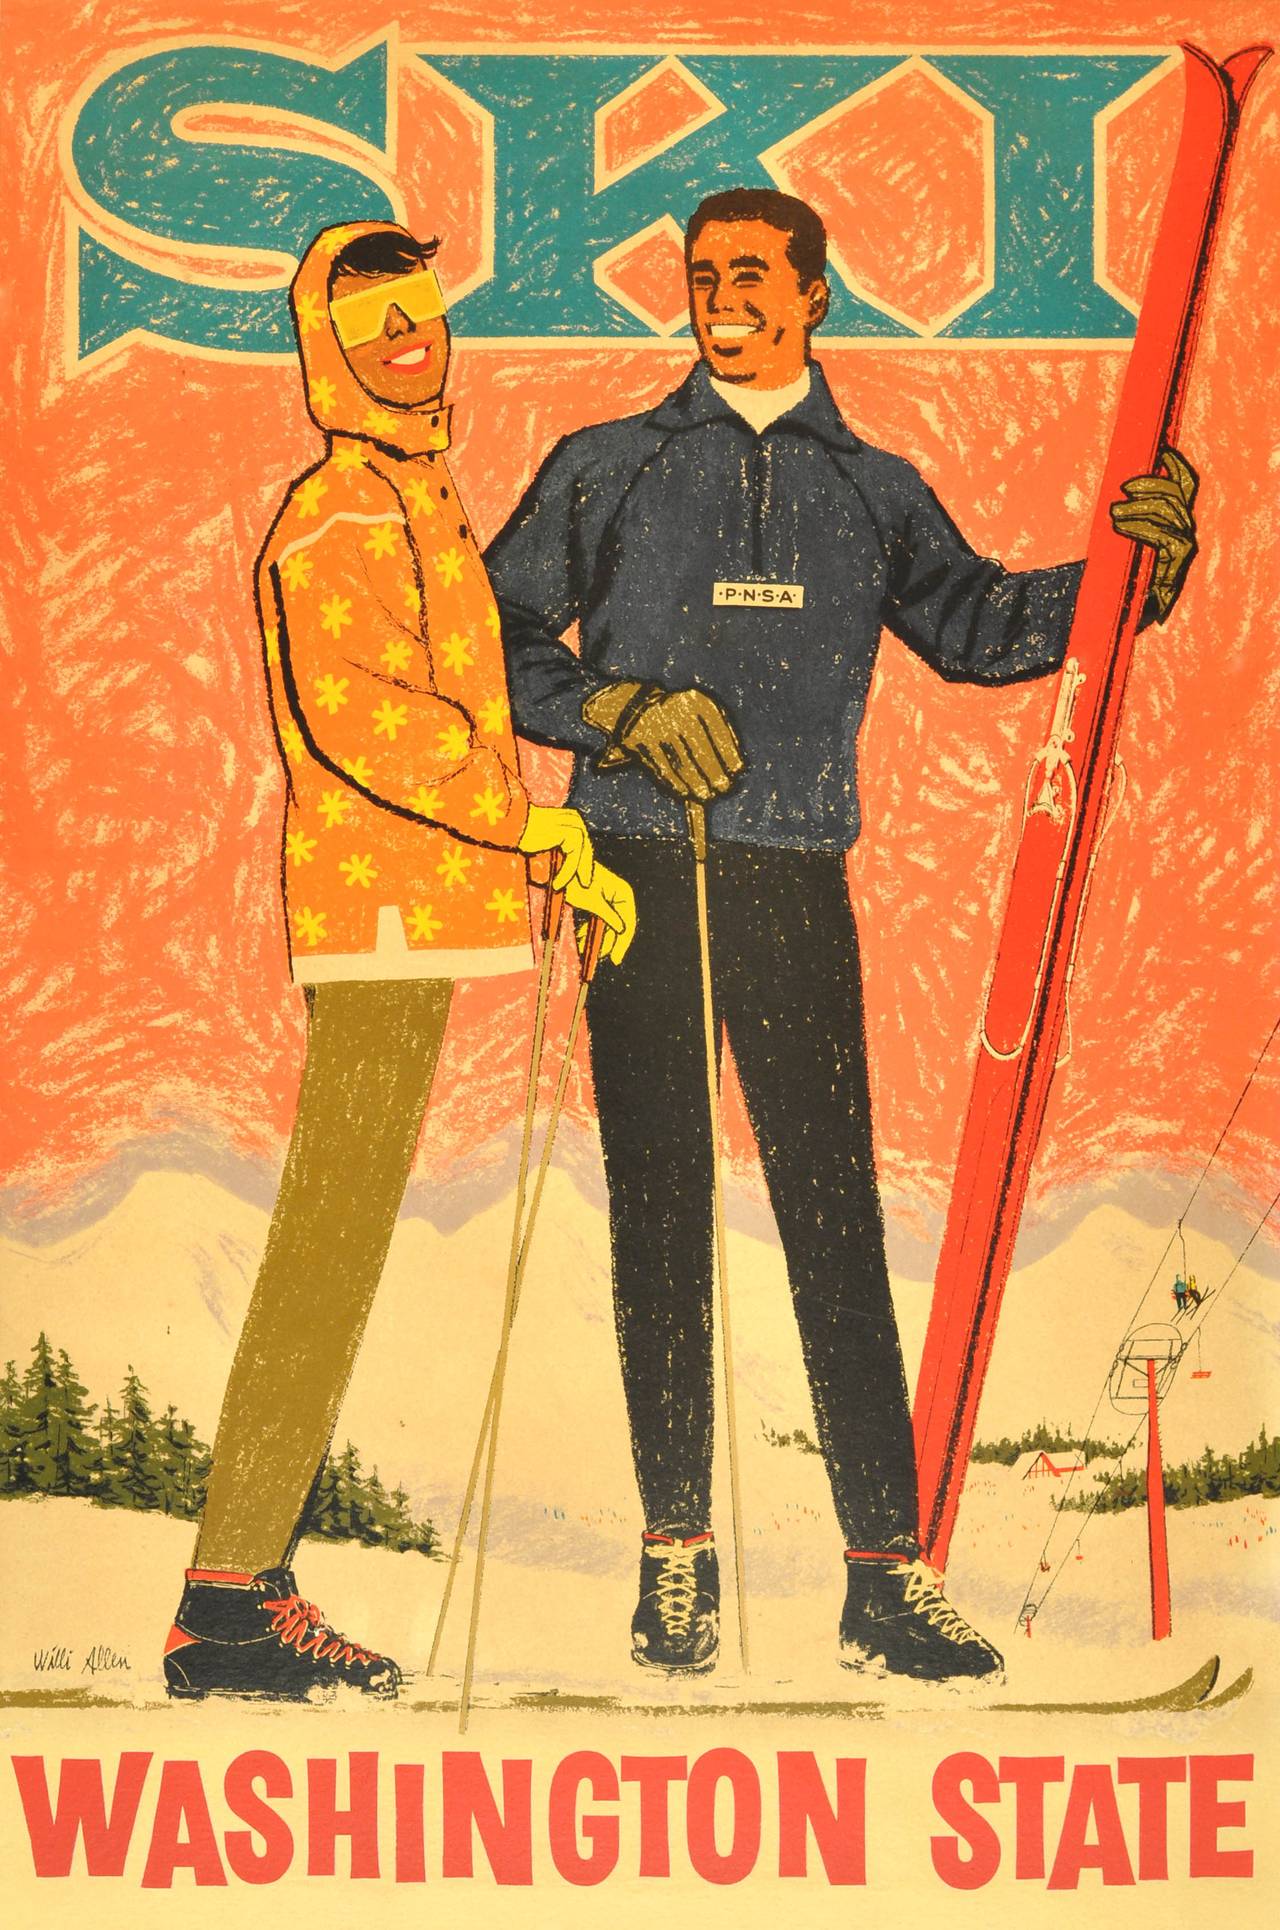 Original vintage poster advertising skiing in Washington State. Colourful image of a fashionably dressed couple, the man wearing a jacket with the initials PNSA (Pacific Northwest Ski Association) on it, standing next to a lady on skis wearing a